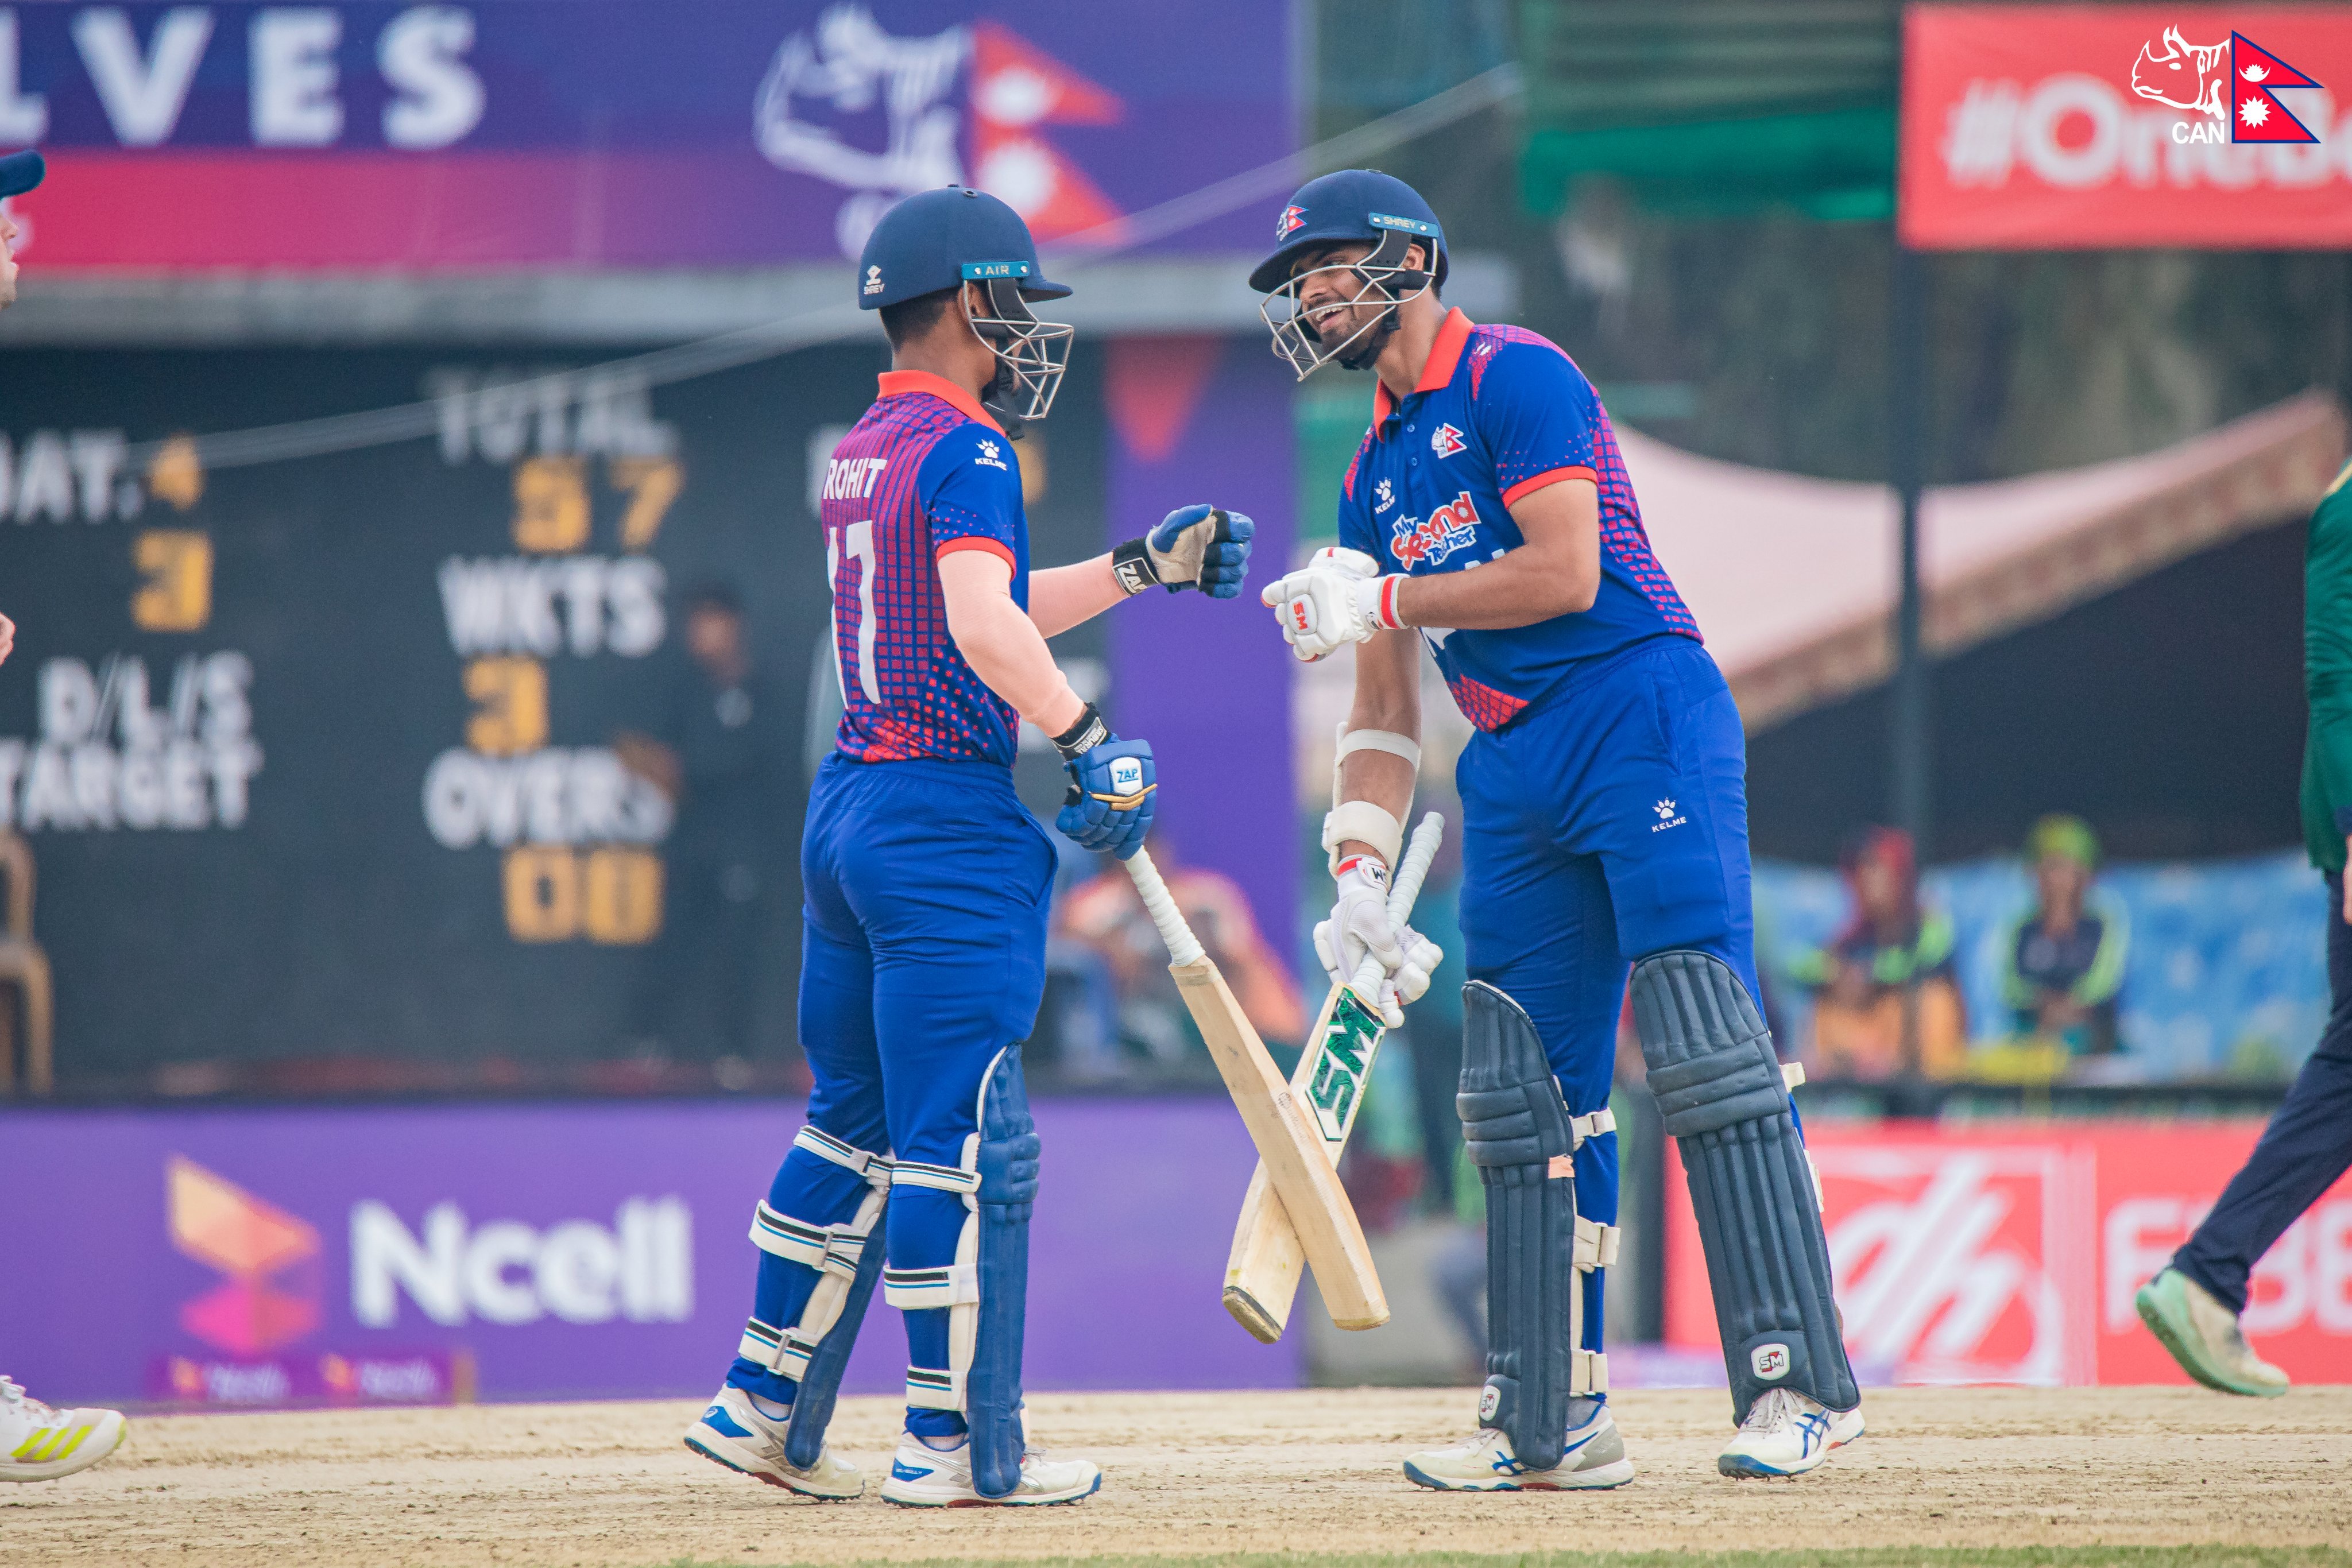 Nepal sets challenging target of 199 runs for Ireland Wolves in second T20 showdown